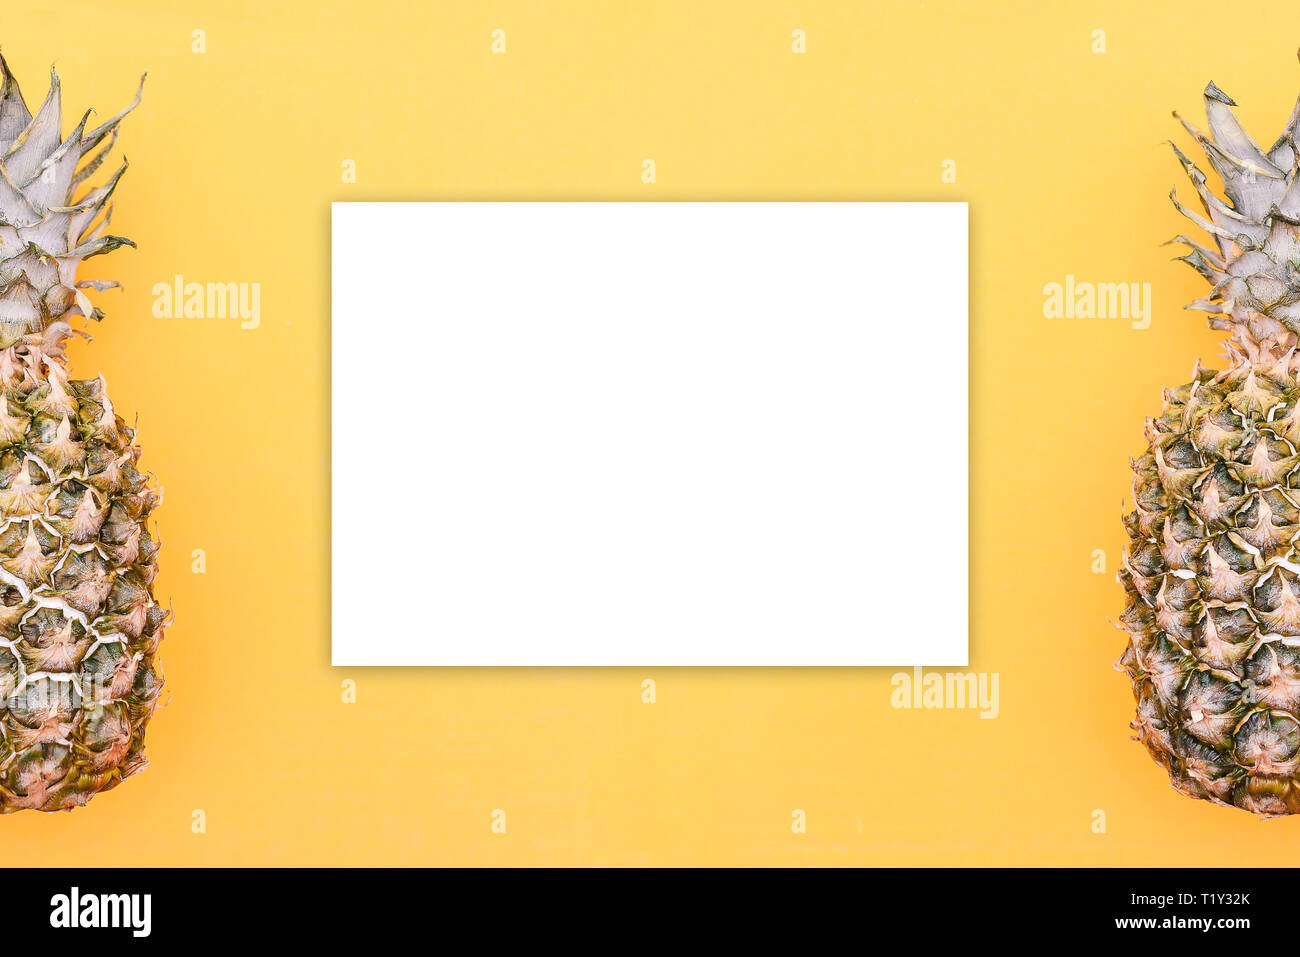 Pineapples lie on the edges of the orange background. In the center is a white blank sheet for writing text. Template on the theme of health or health Stock Photo